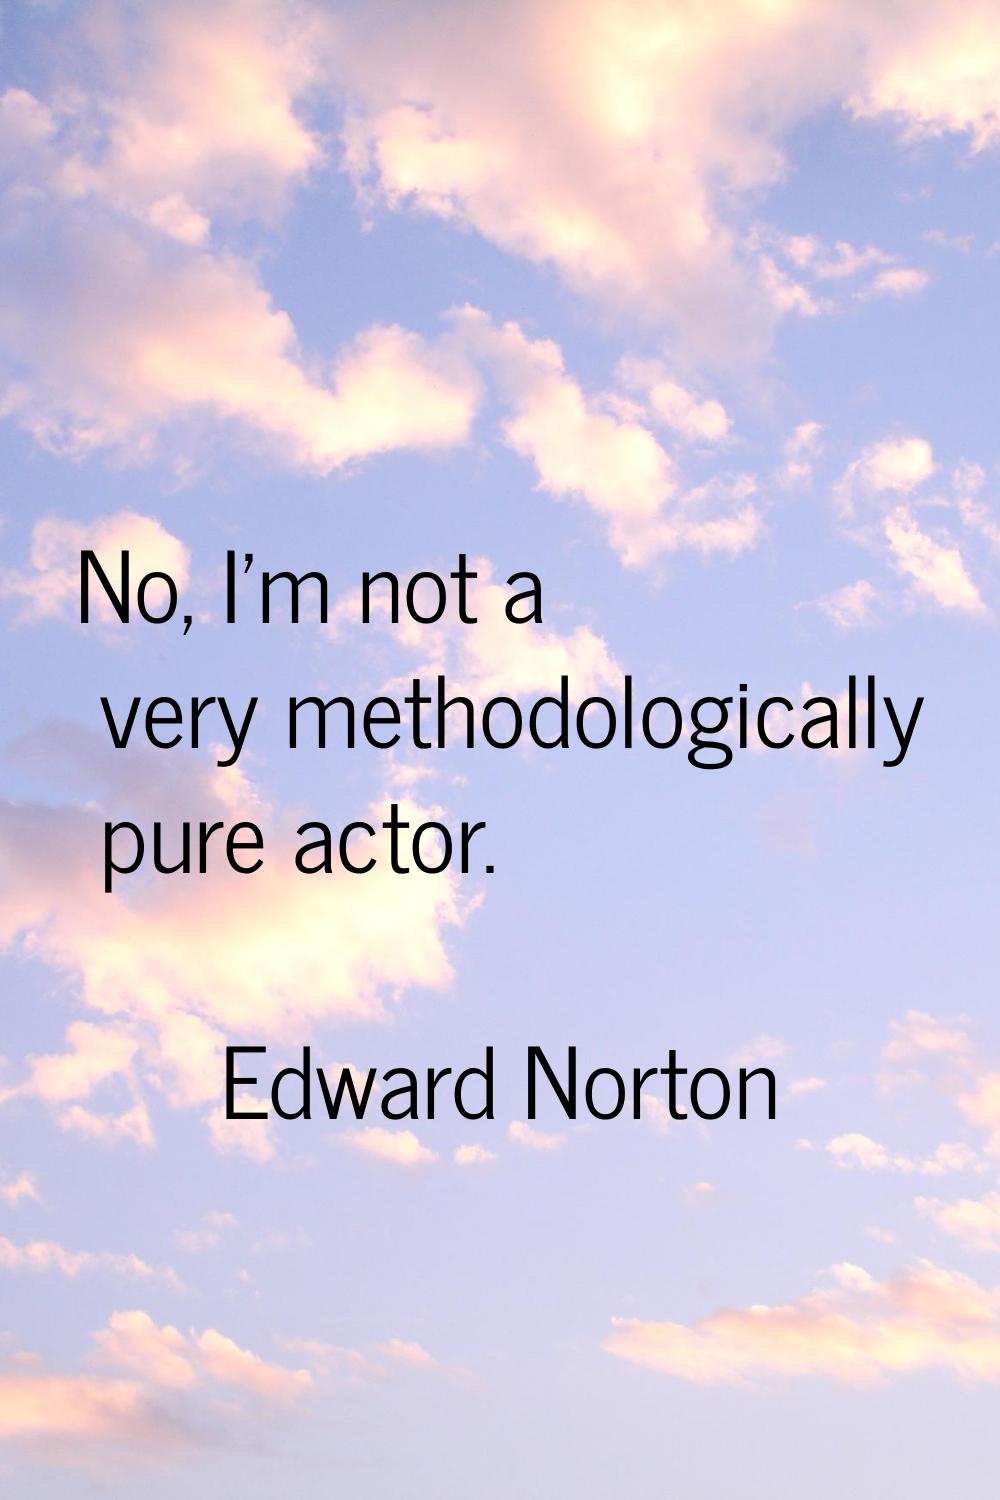 No, I'm not a very methodologically pure actor.